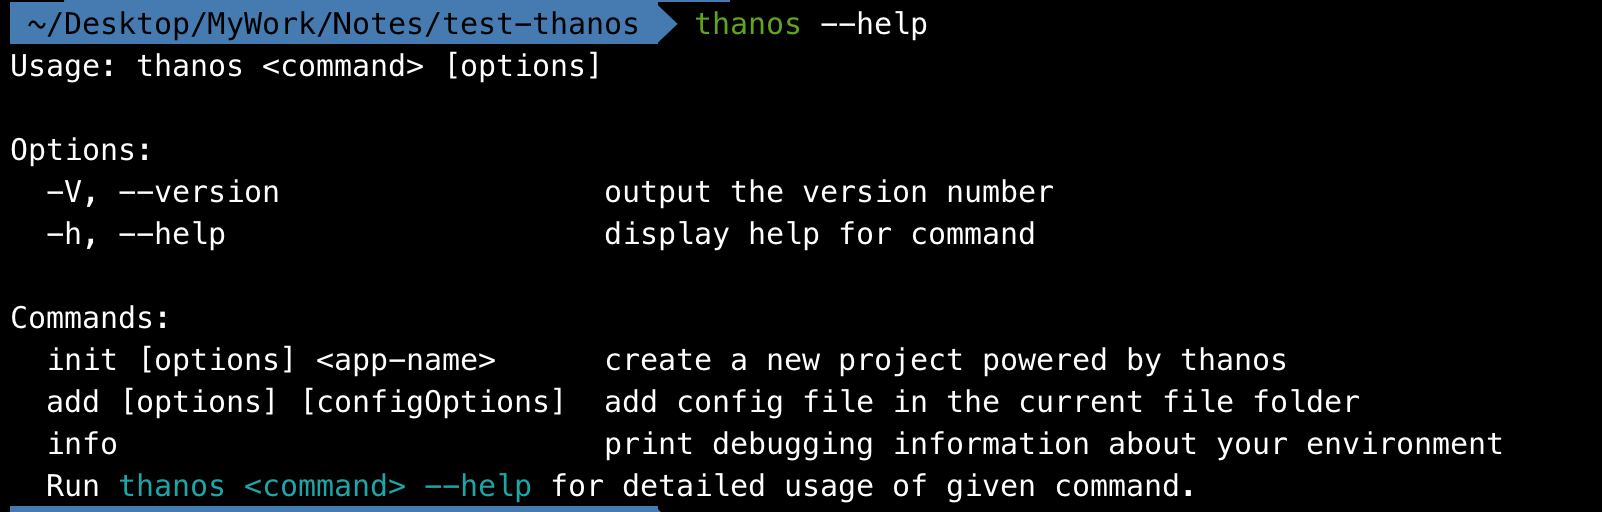 thanos--help.png